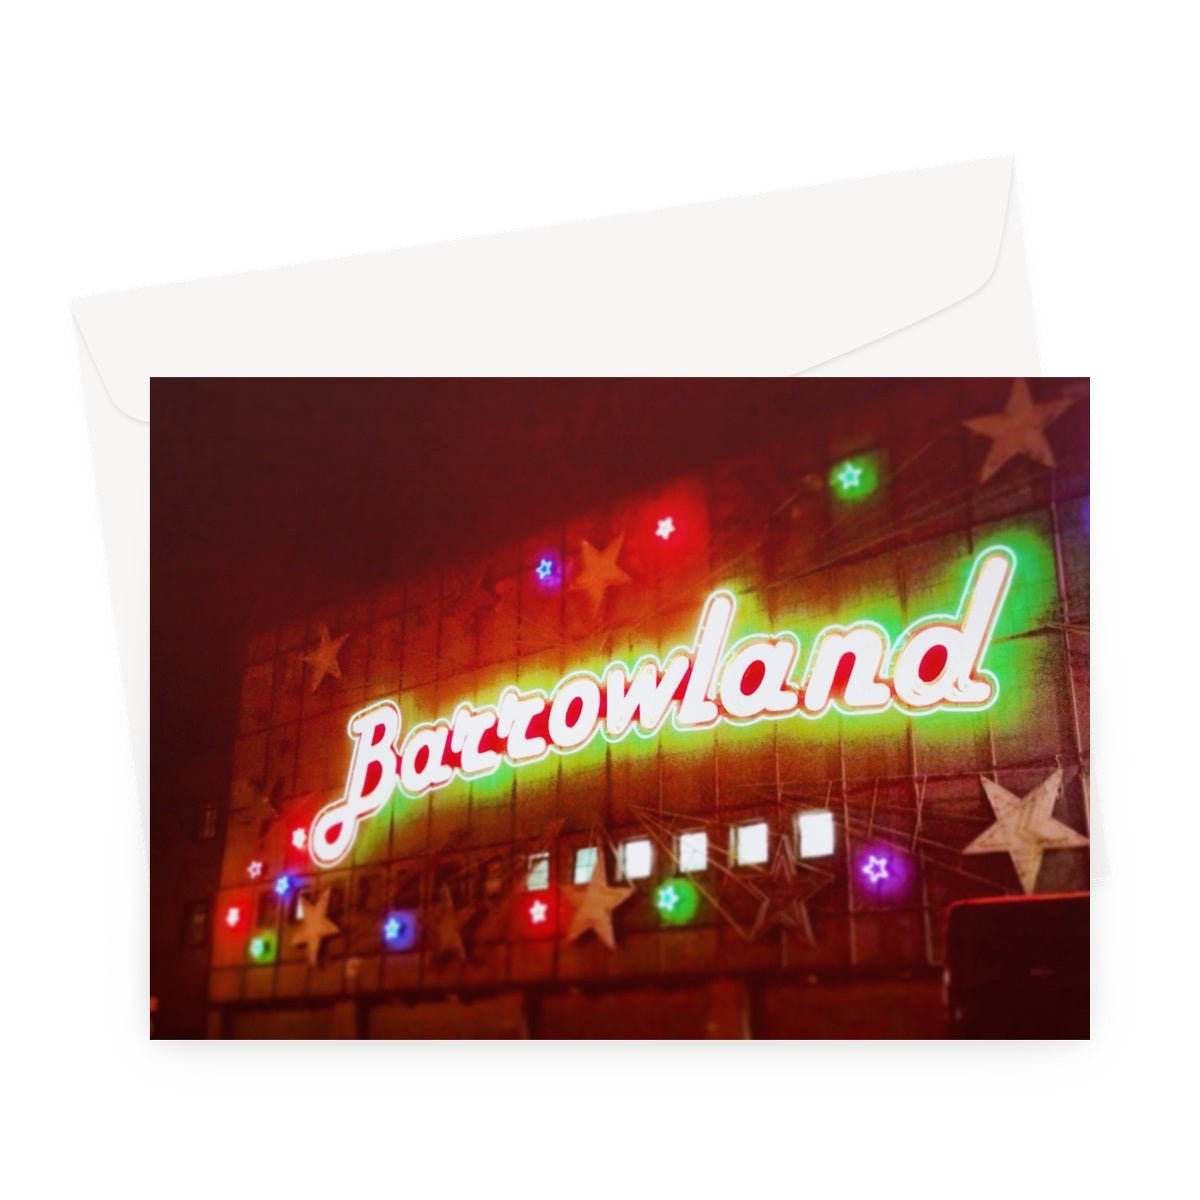 A Neon Glasgow Barrowlands Art Gifts Greeting Card-Greetings Cards-Edinburgh & Glasgow Art Gallery-A5 Landscape-1 Card-Paintings, Prints, Homeware, Art Gifts From Scotland By Scottish Artist Kevin Hunter